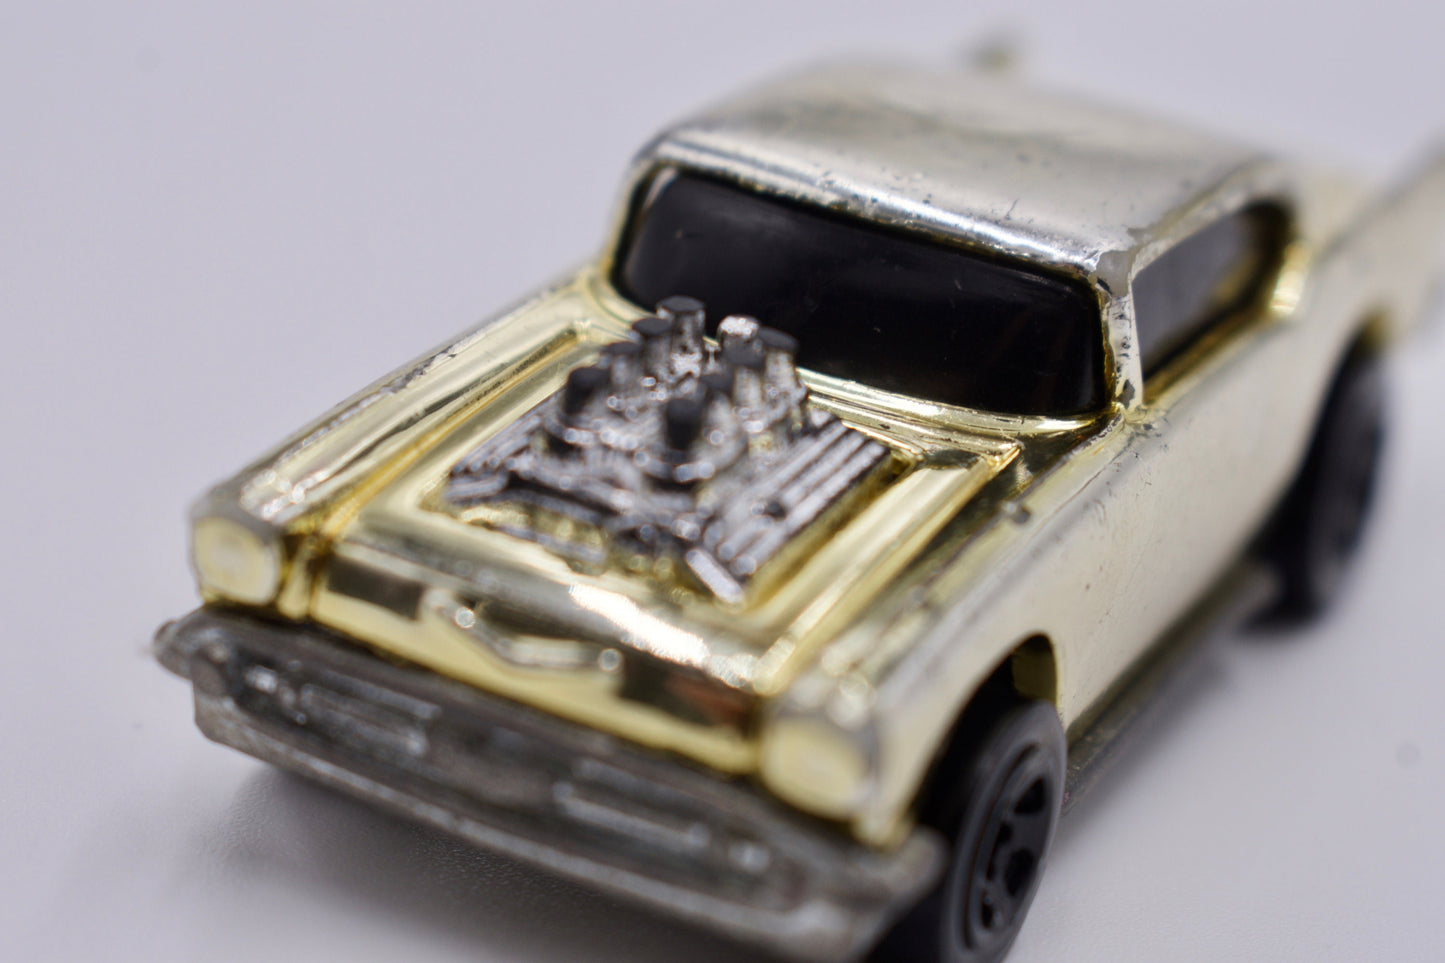 Hot Wheels '57 Chevy Gold Shiners Perfect Birthday Gift Miniature Collectible Scale Model Toy Car